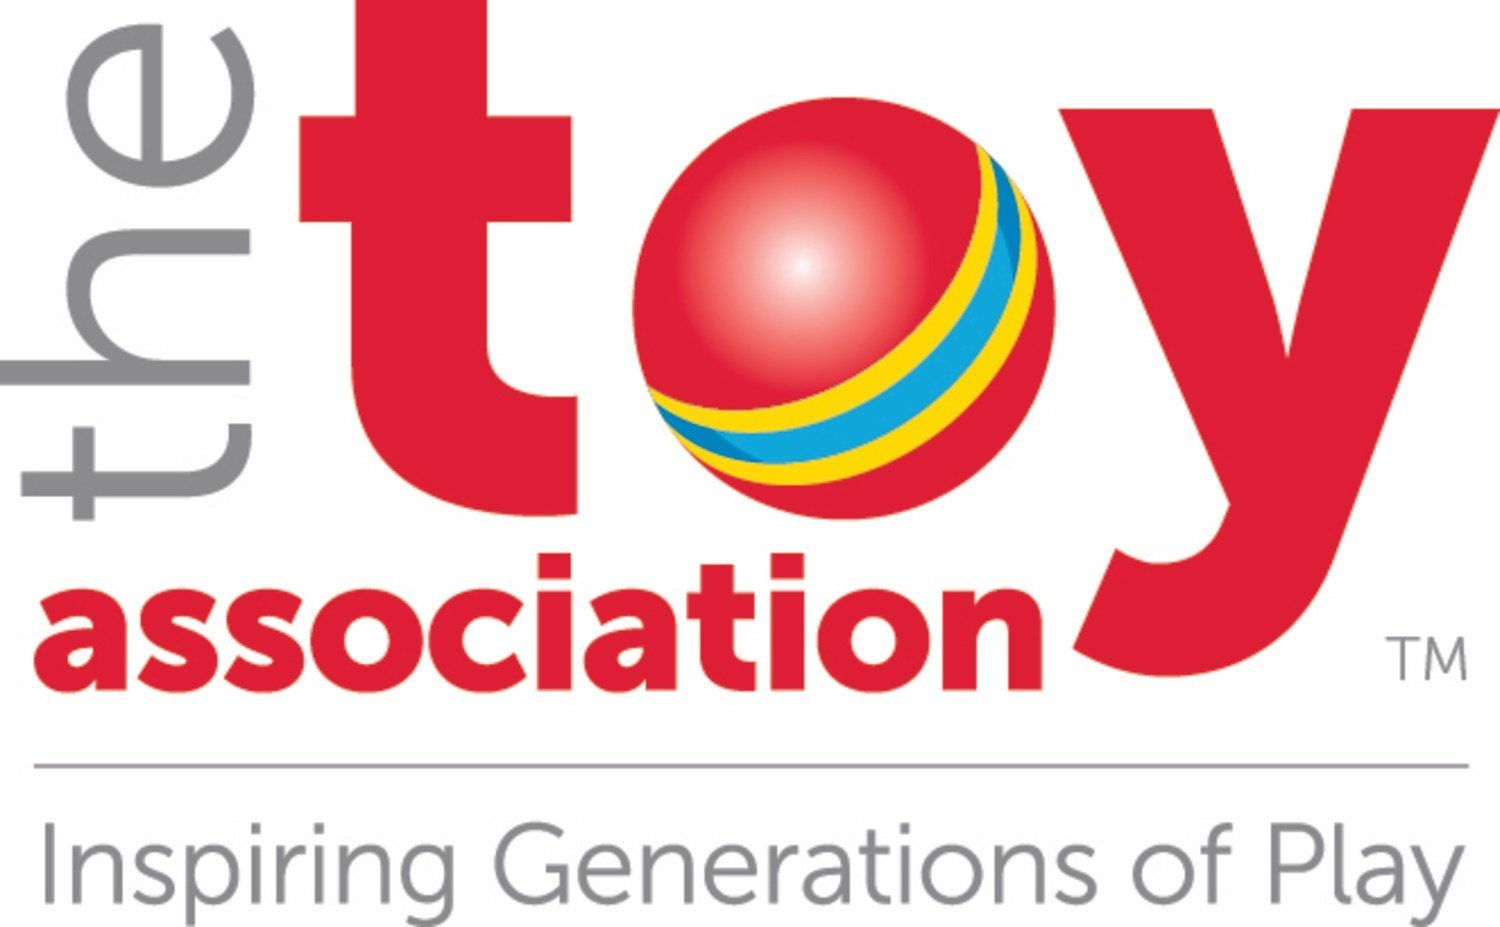 L.O.L Surprise! by MGA Entertainment Wins Prestigious "Toy of the Year" Award